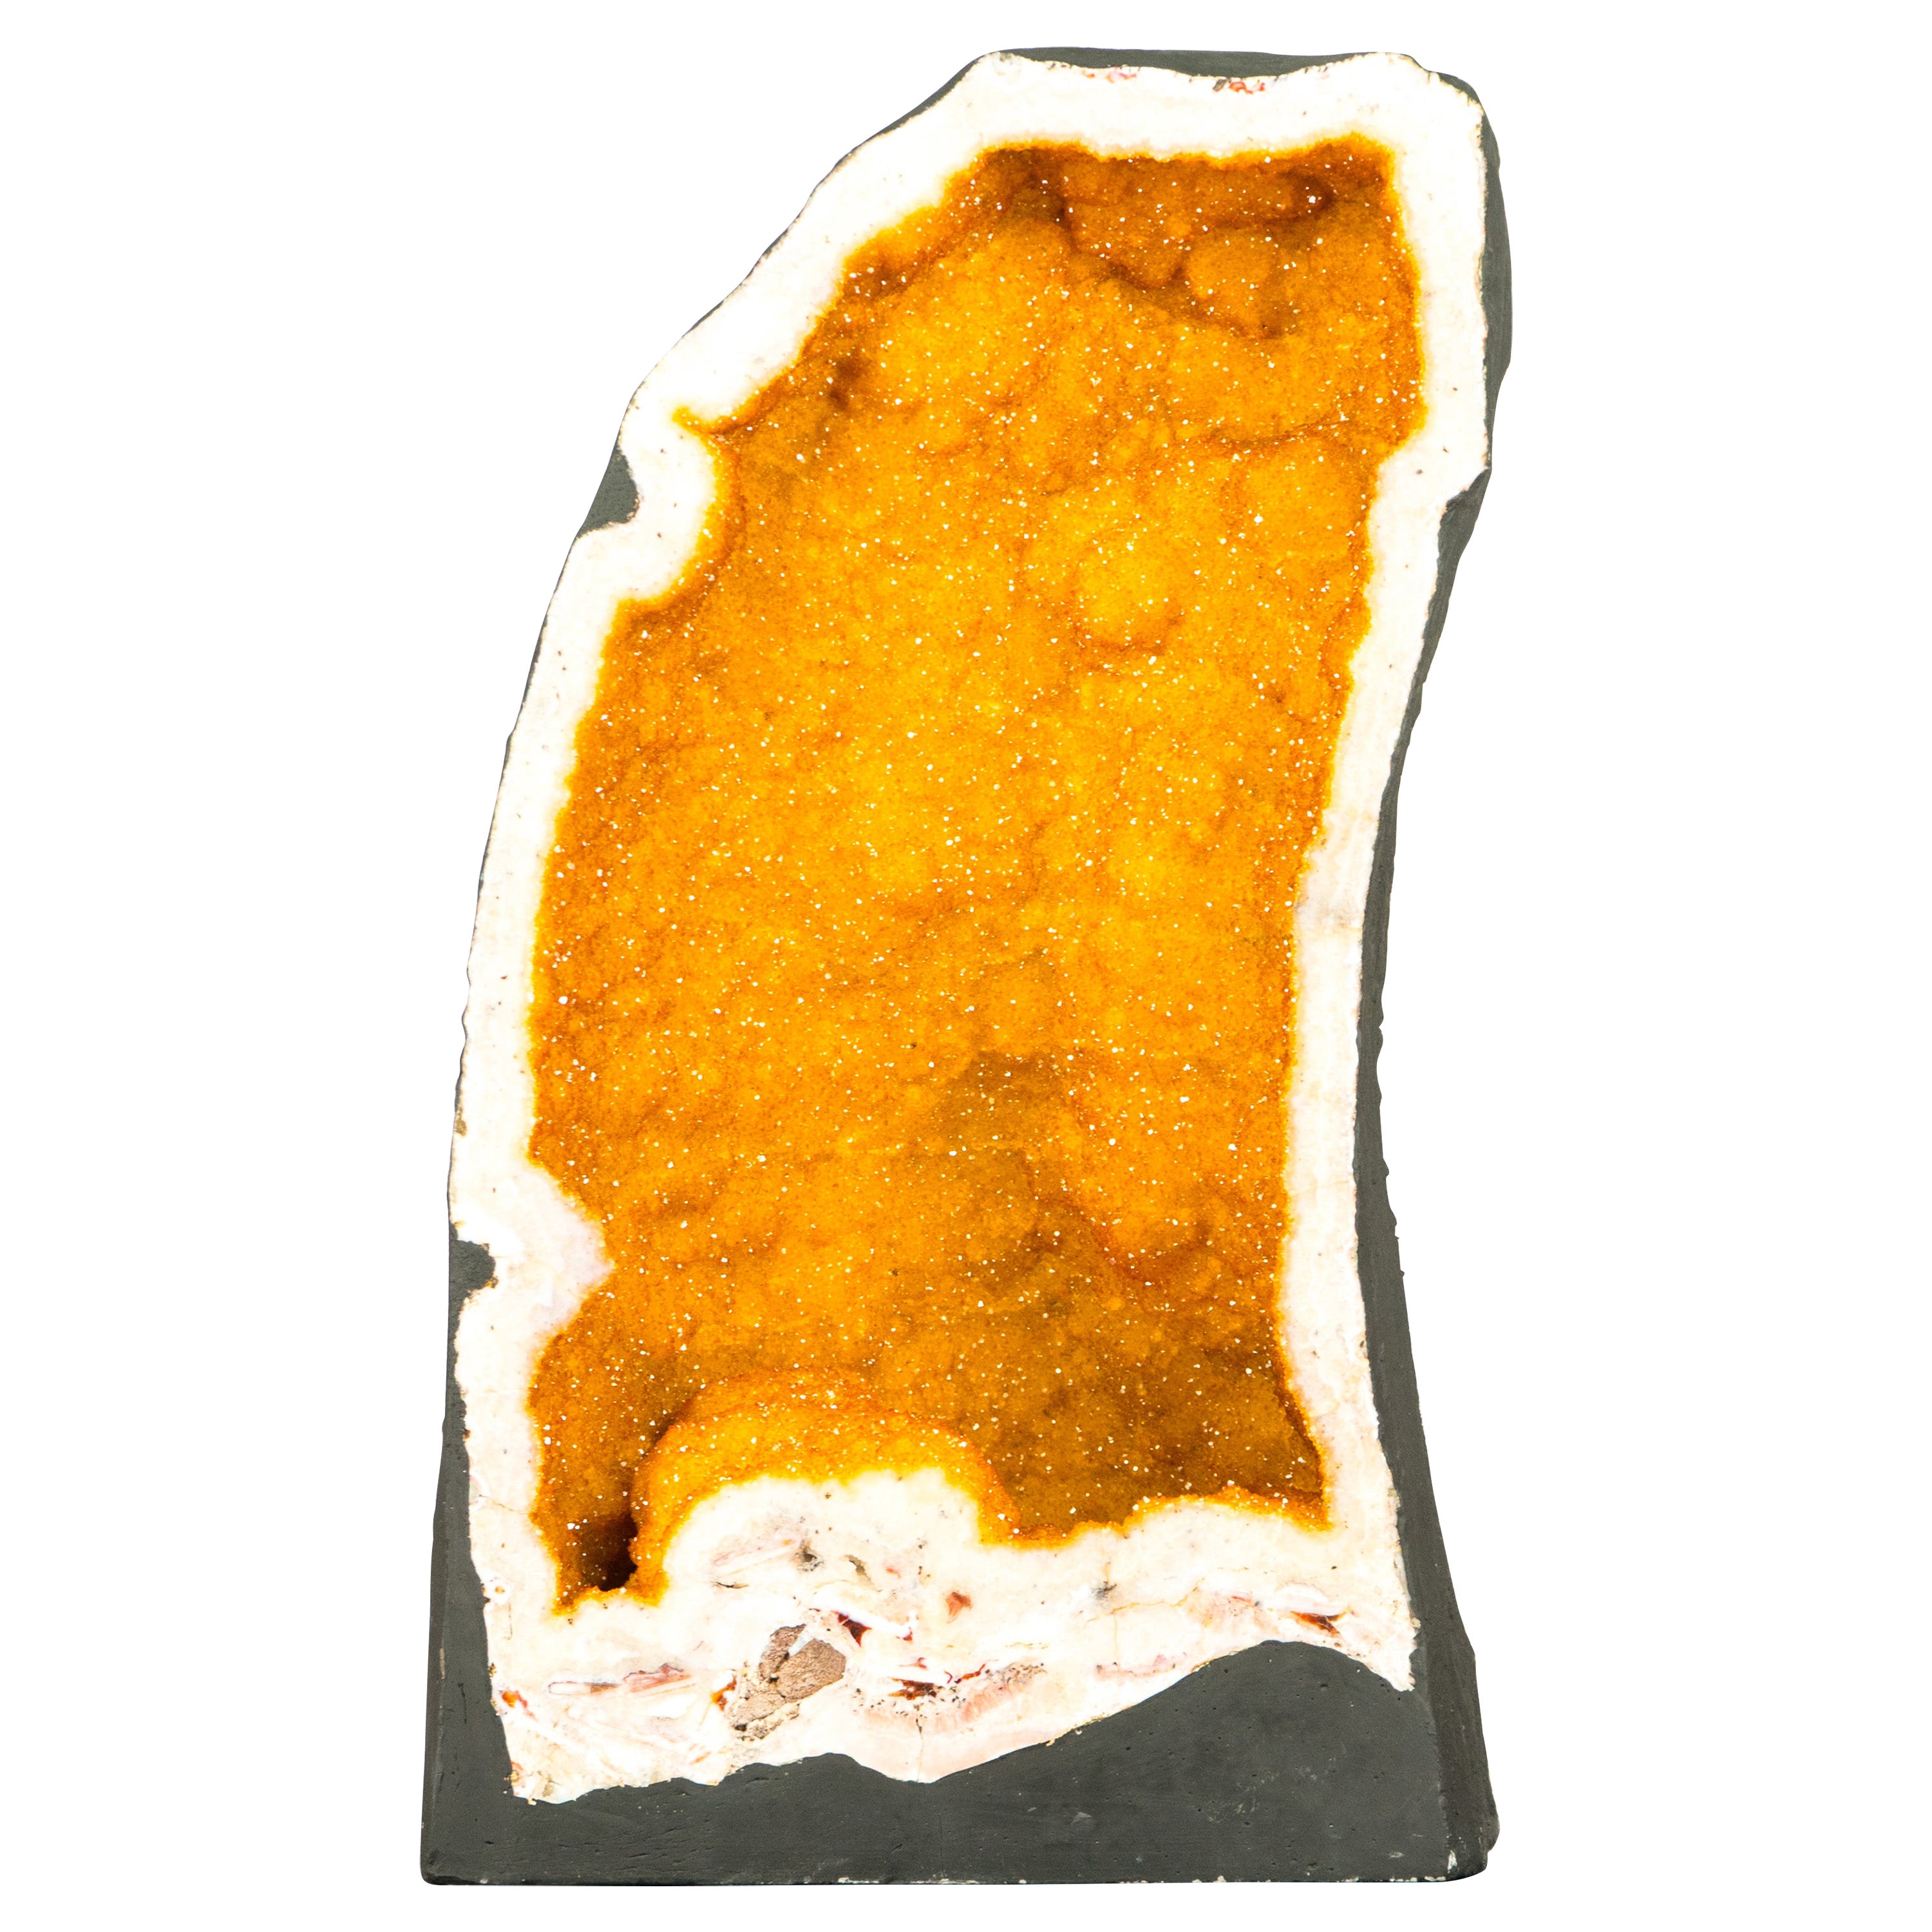 Magnificent Citrine Geode with World-Class Golden Yellow Sparkly Druzy For Sale